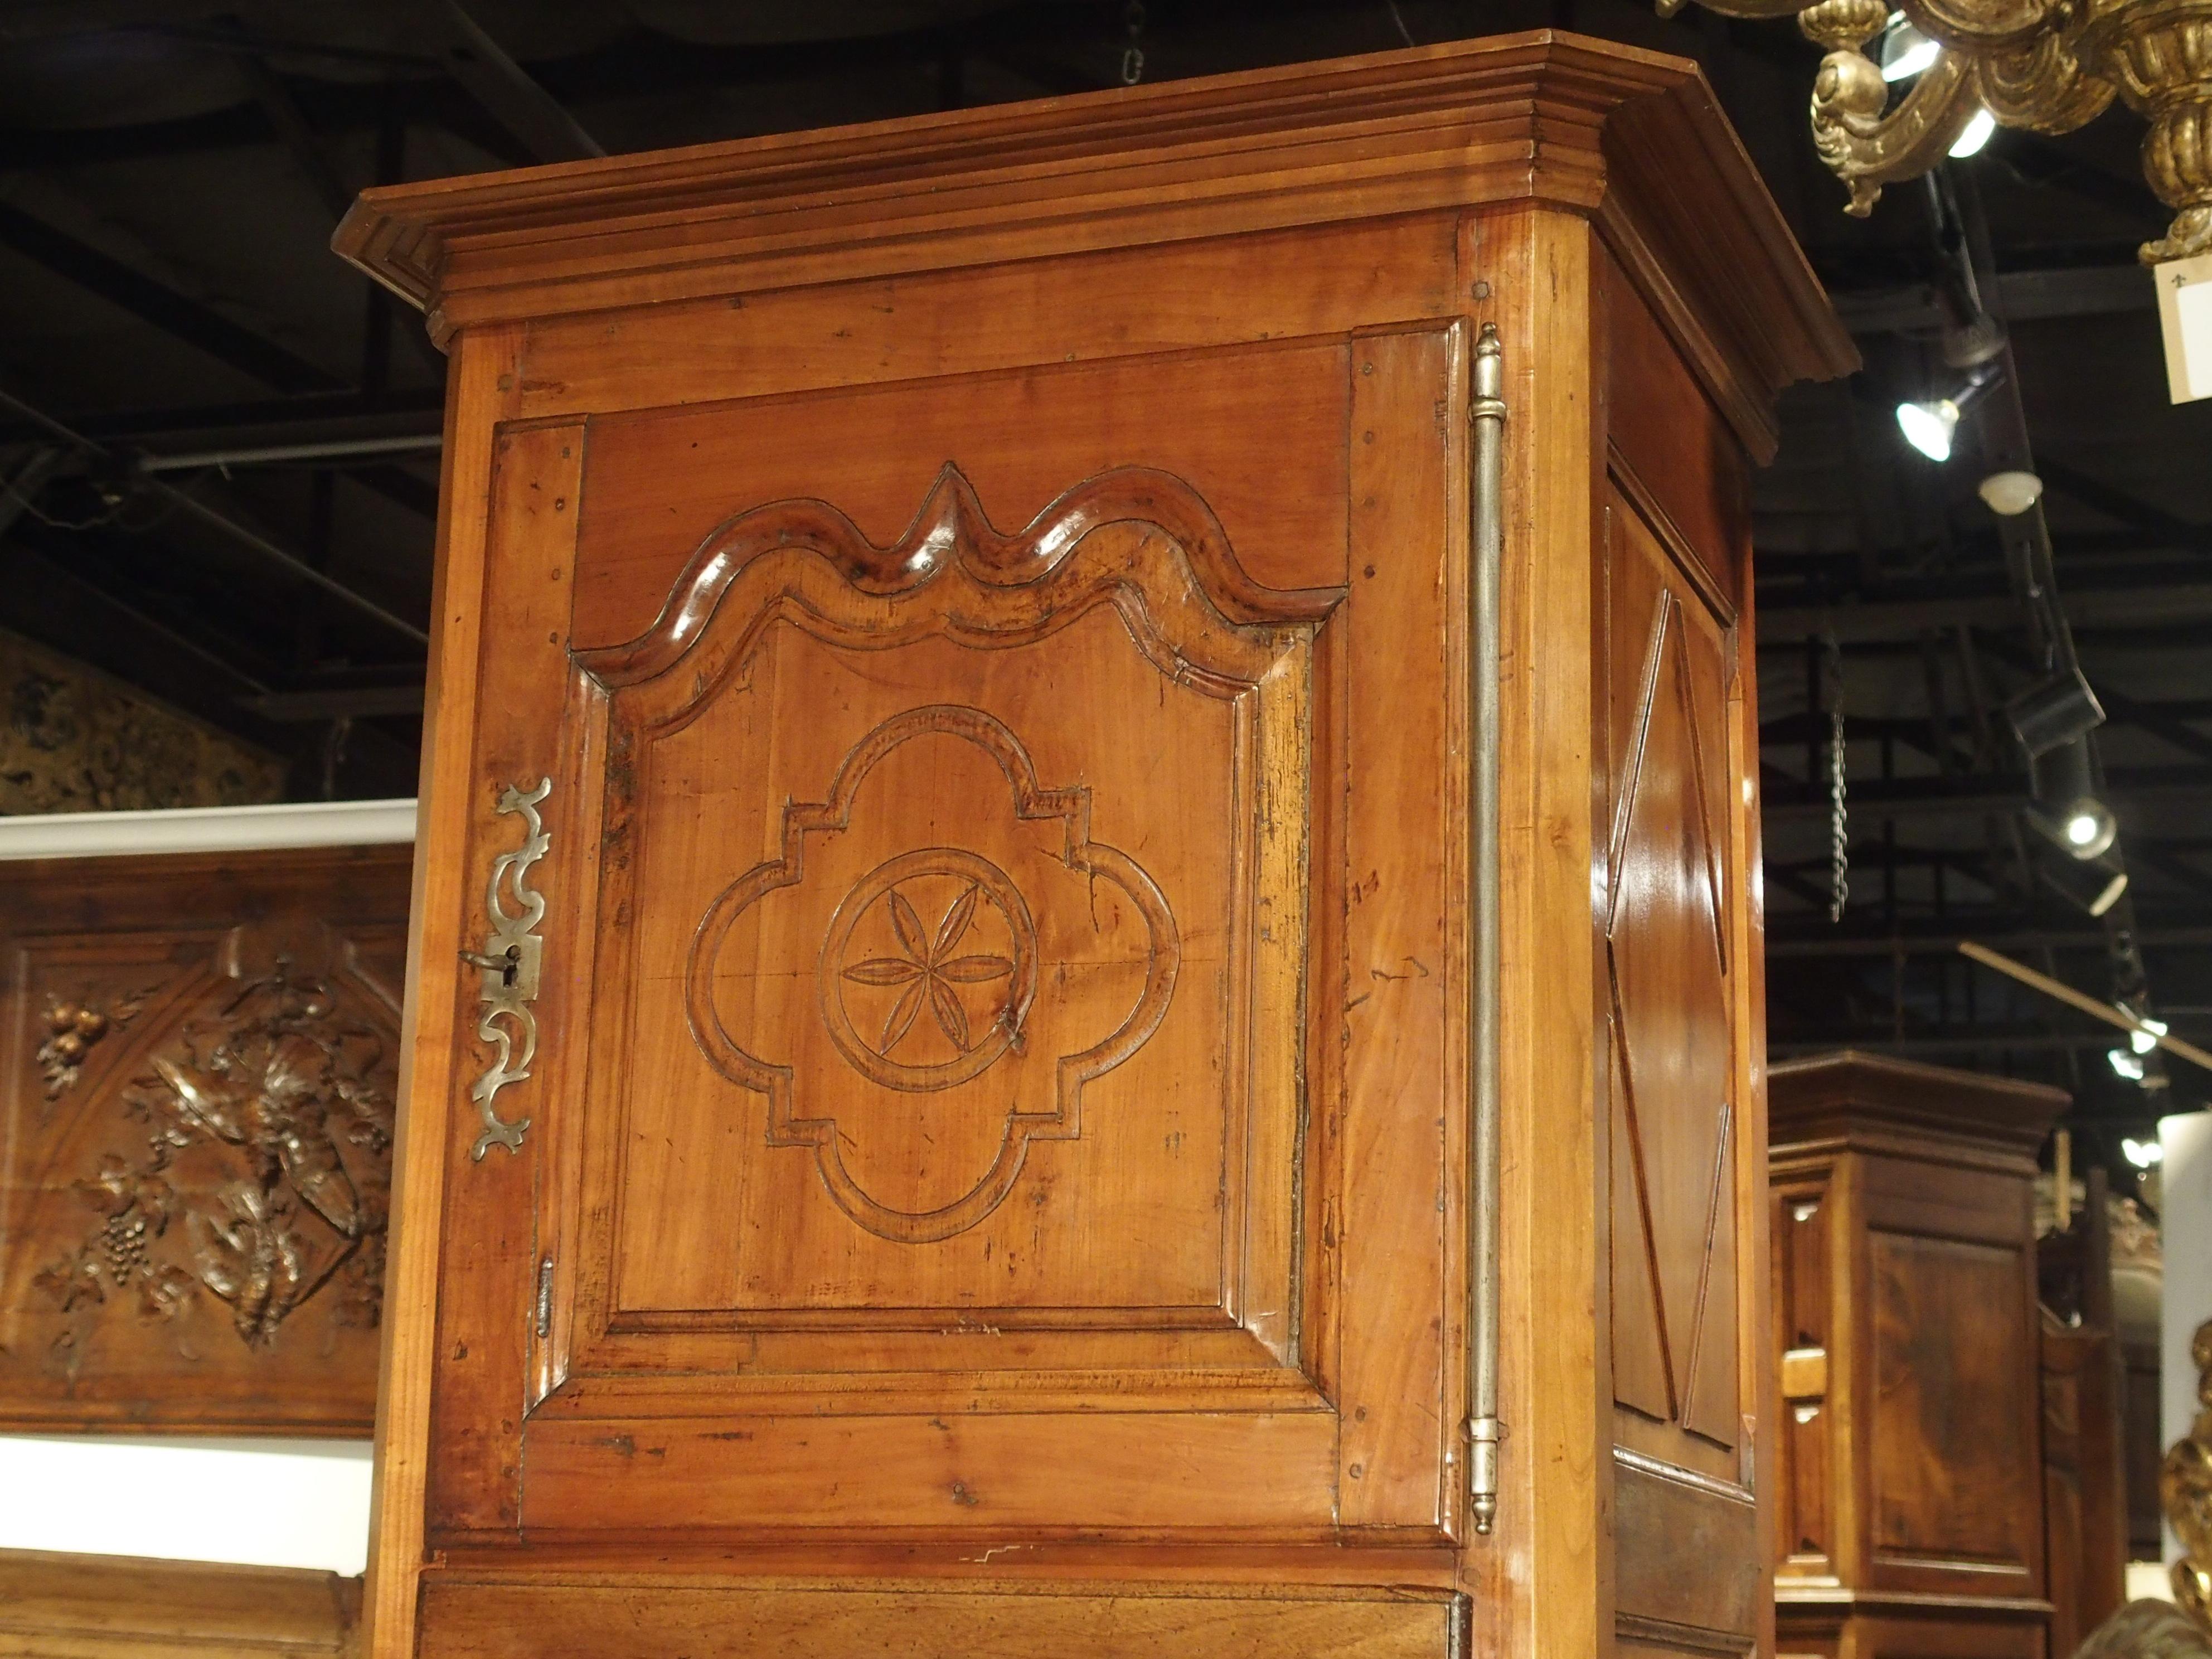 This elegant French cabinet has been carved out of cherrywood during the mid-1800s. It is characterized by having a much narrower body than a normal armoire, as well as having an upper and lower door, separated by a center drawer. Many of the oldest